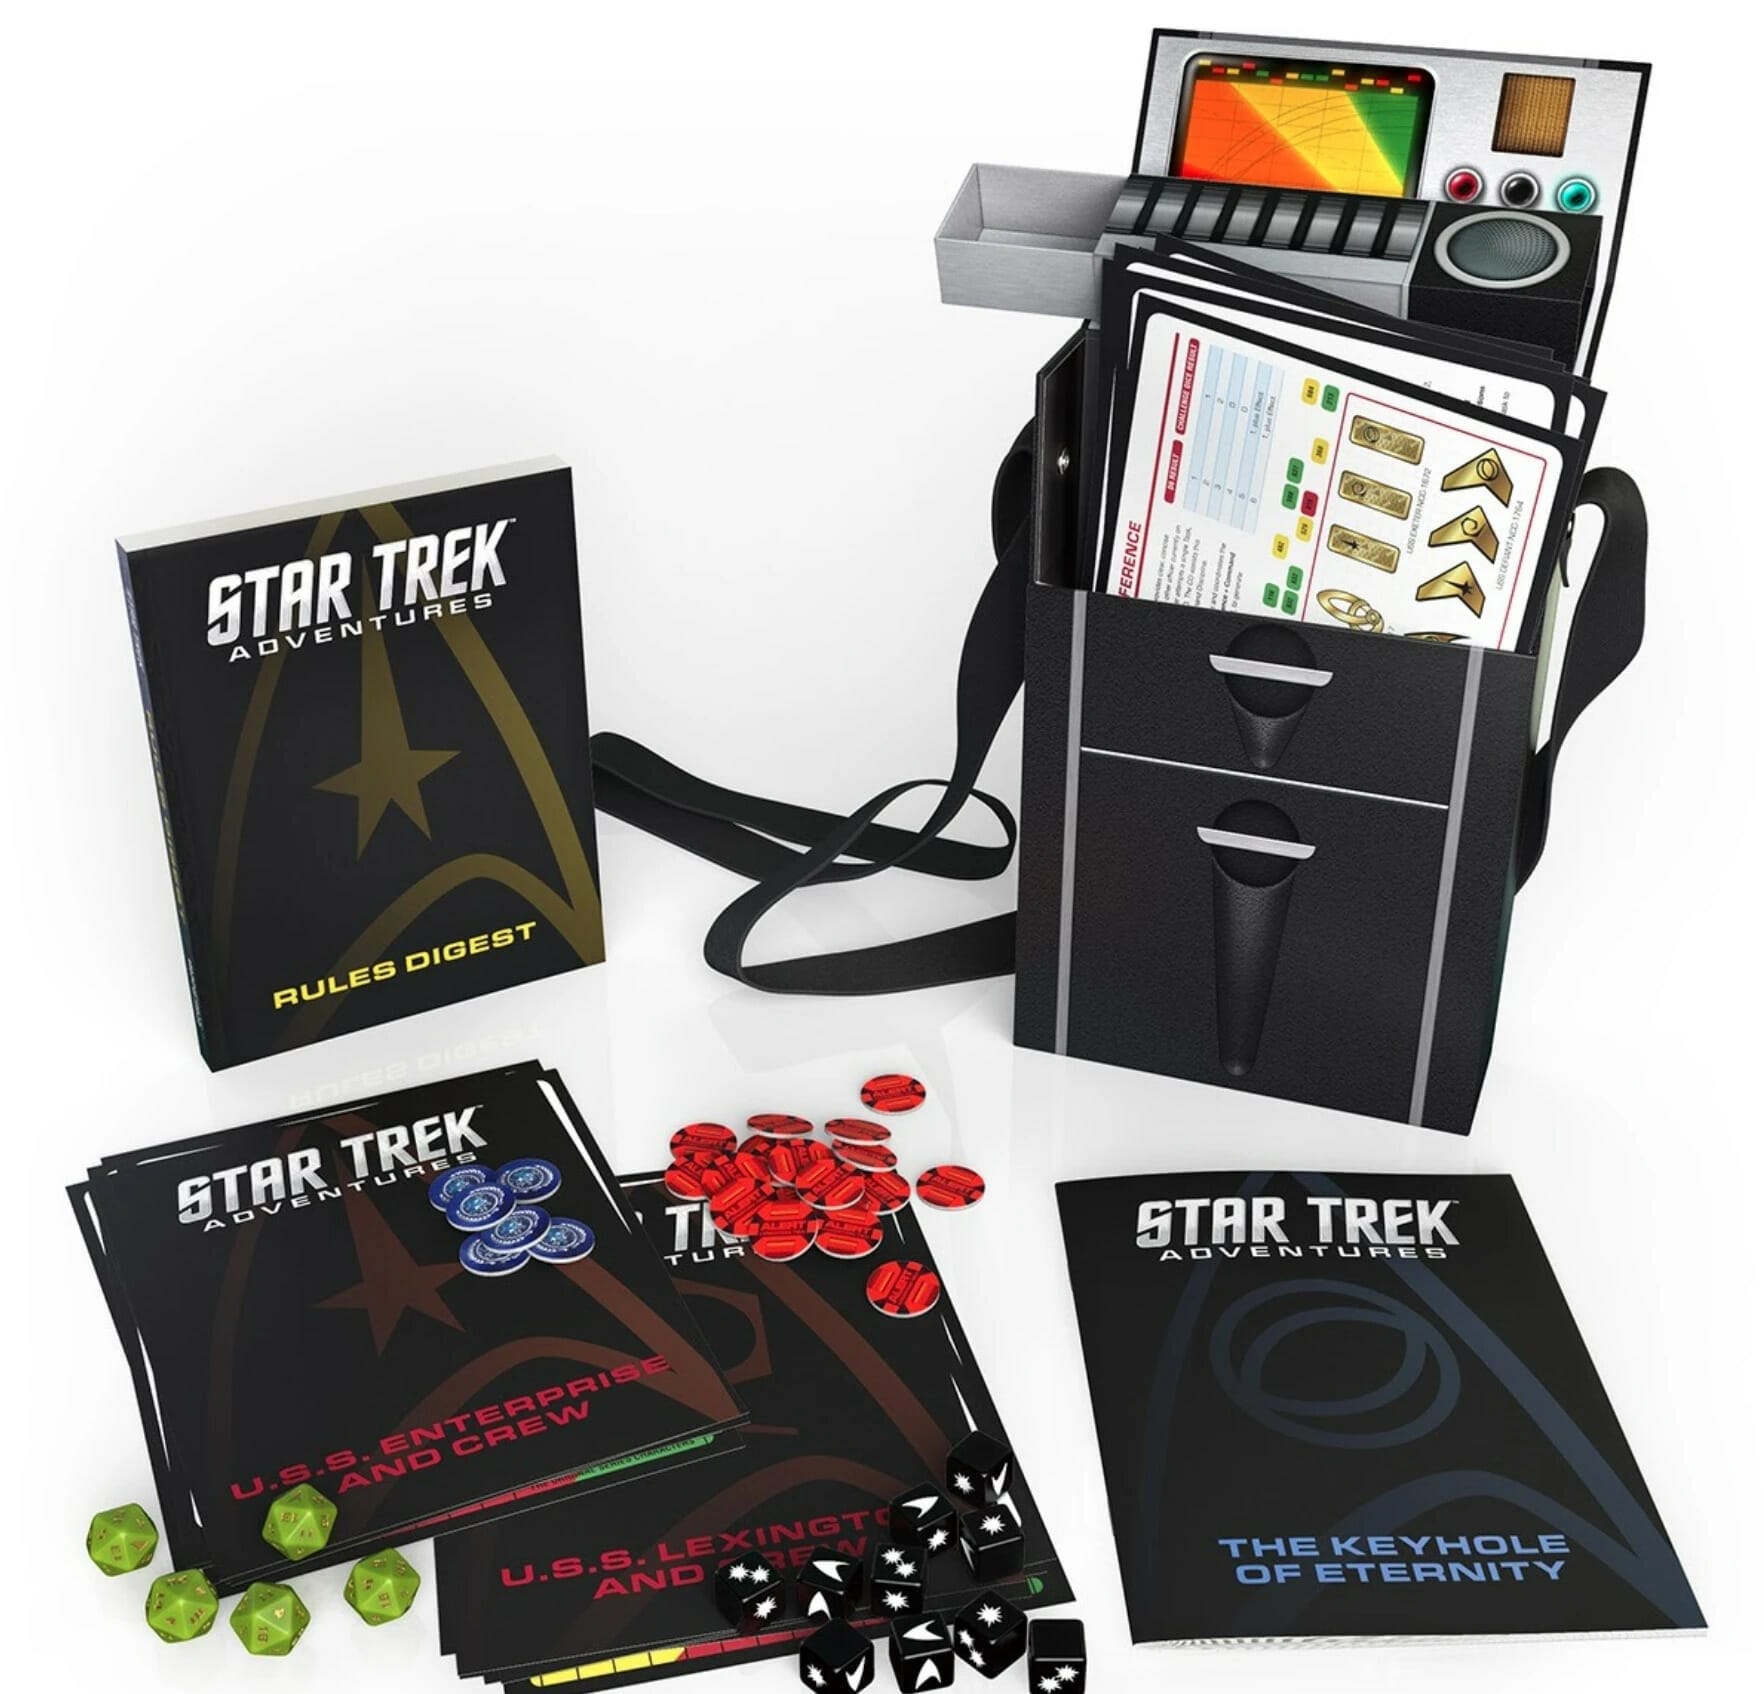 Modiphius has had the license from CBS to make Star Trek miniatures and the Star Trek Adventures RPG since 2016.